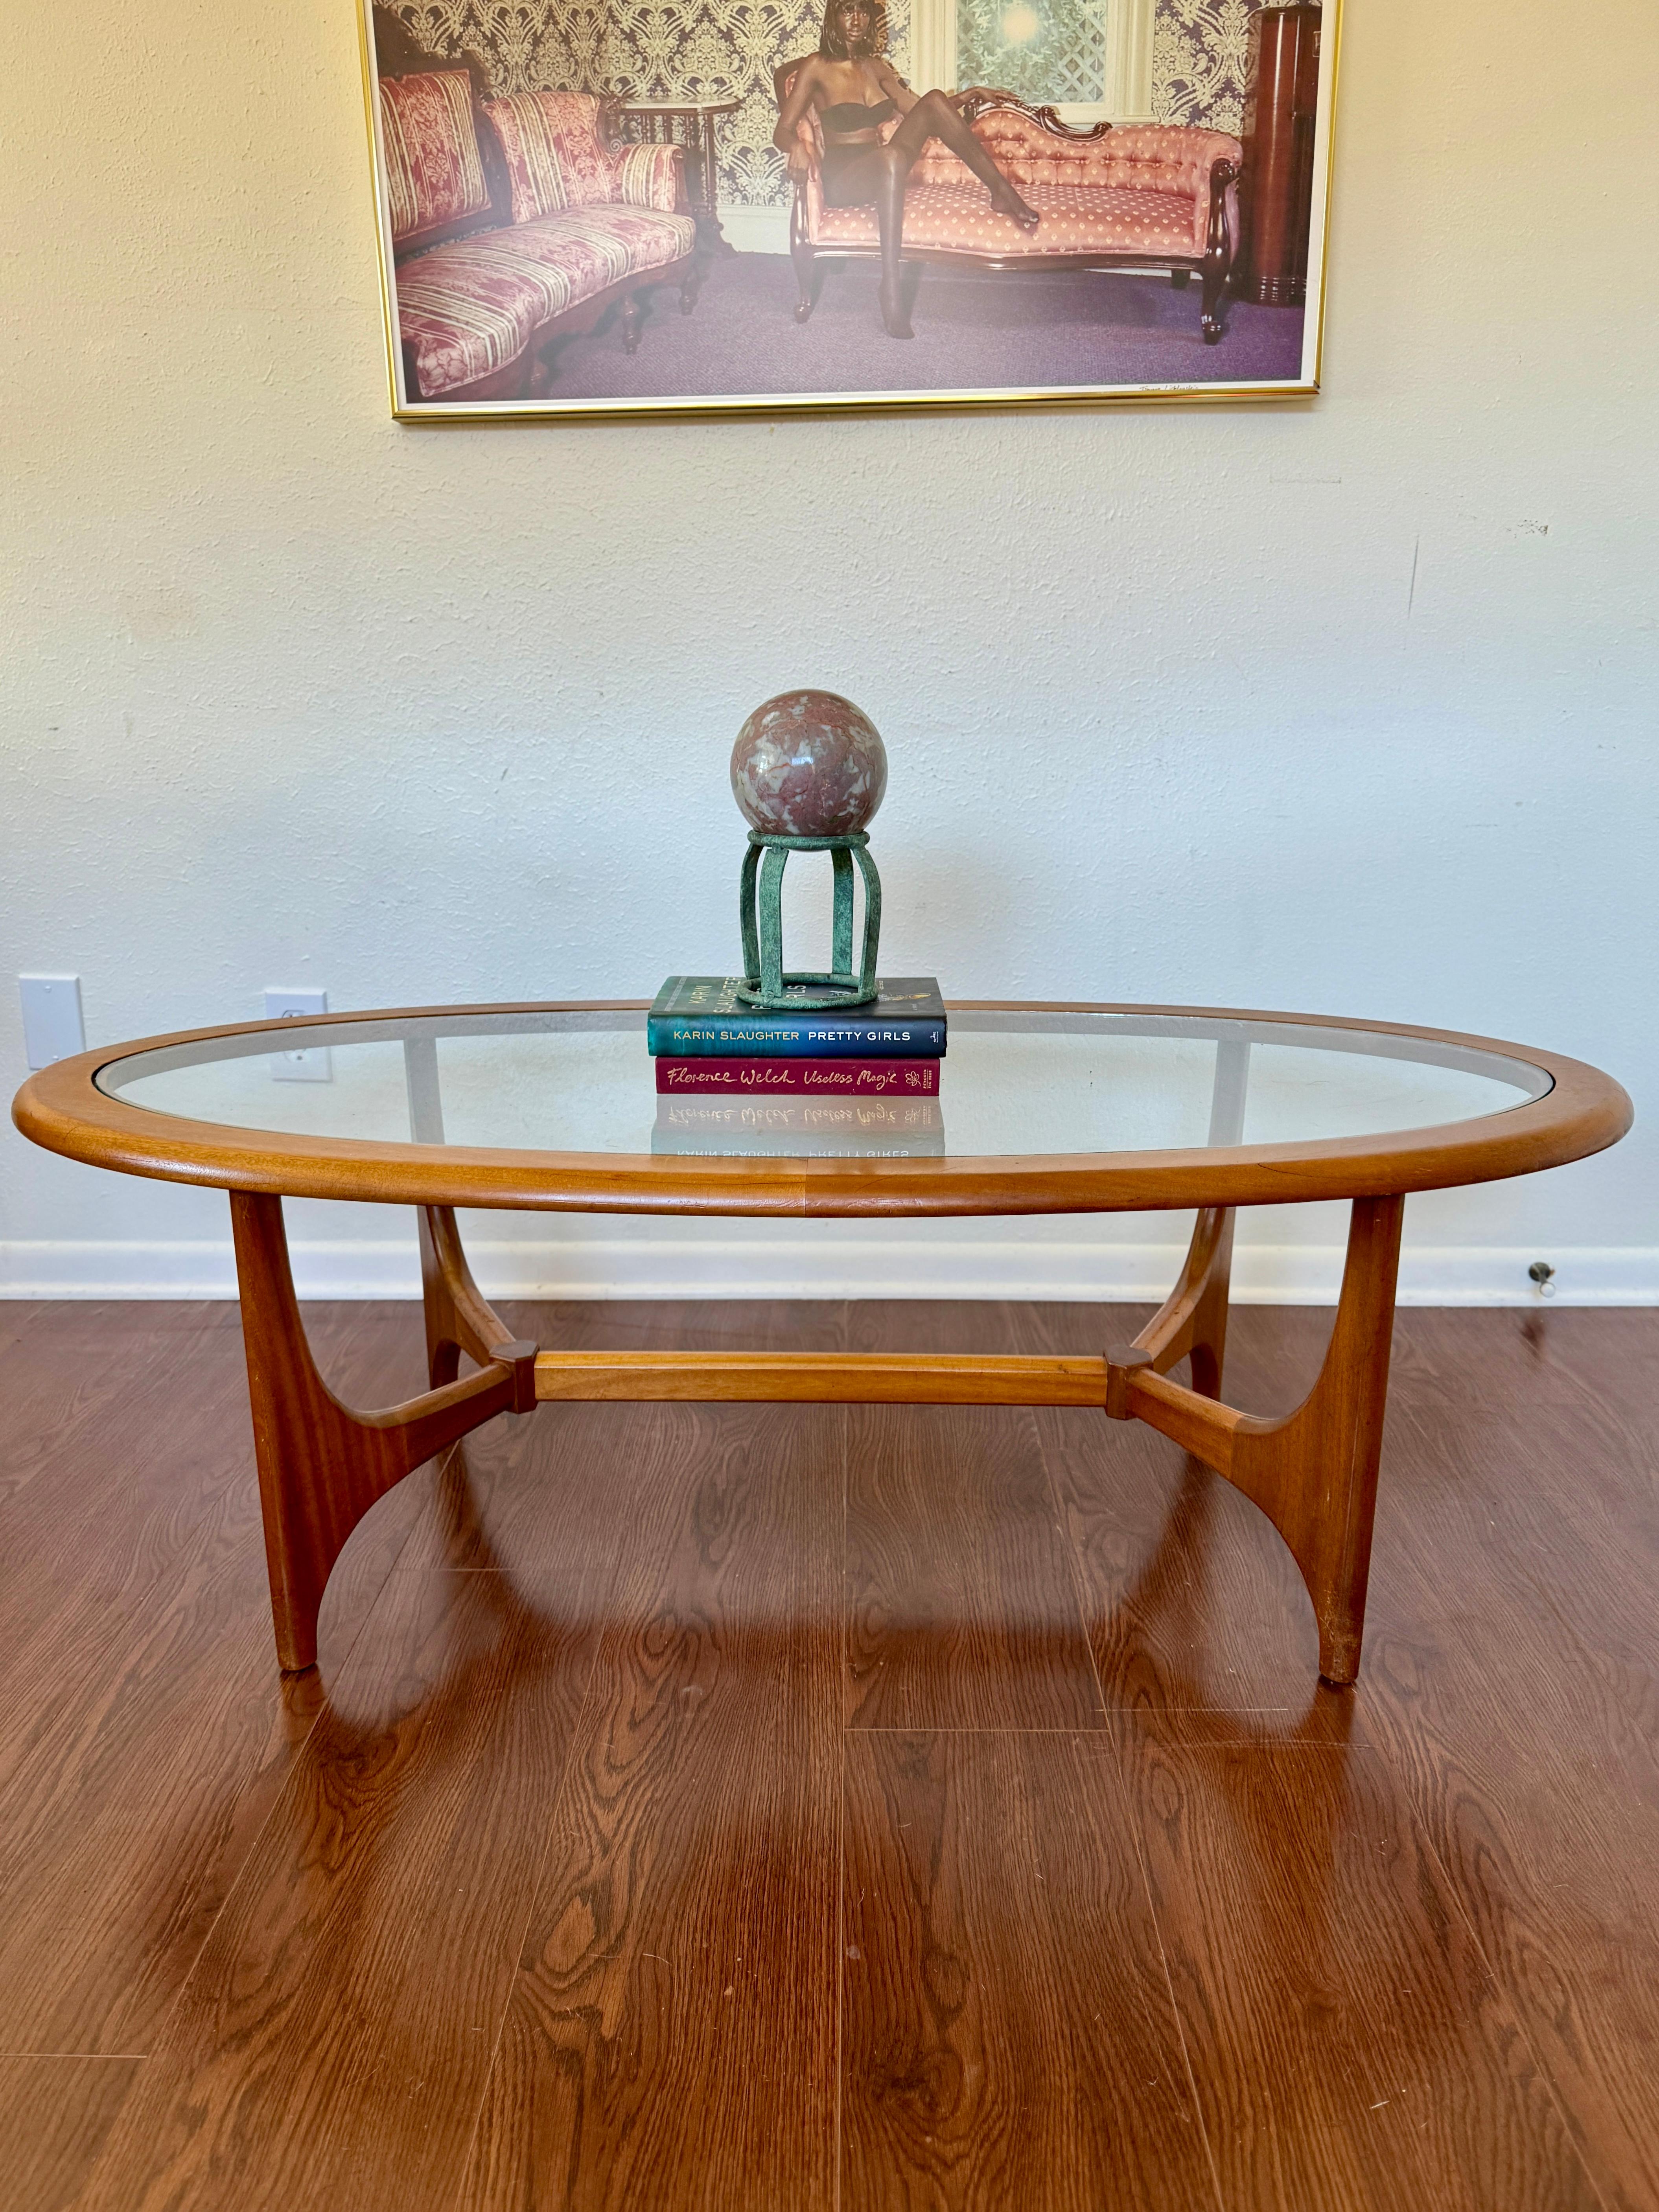 Mid century modern coffee table with a glass top by Stonehill, circa 1960s. Frame is made of teak, and table is in beautiful original condition. 

52” W × 24” D × 17” H
